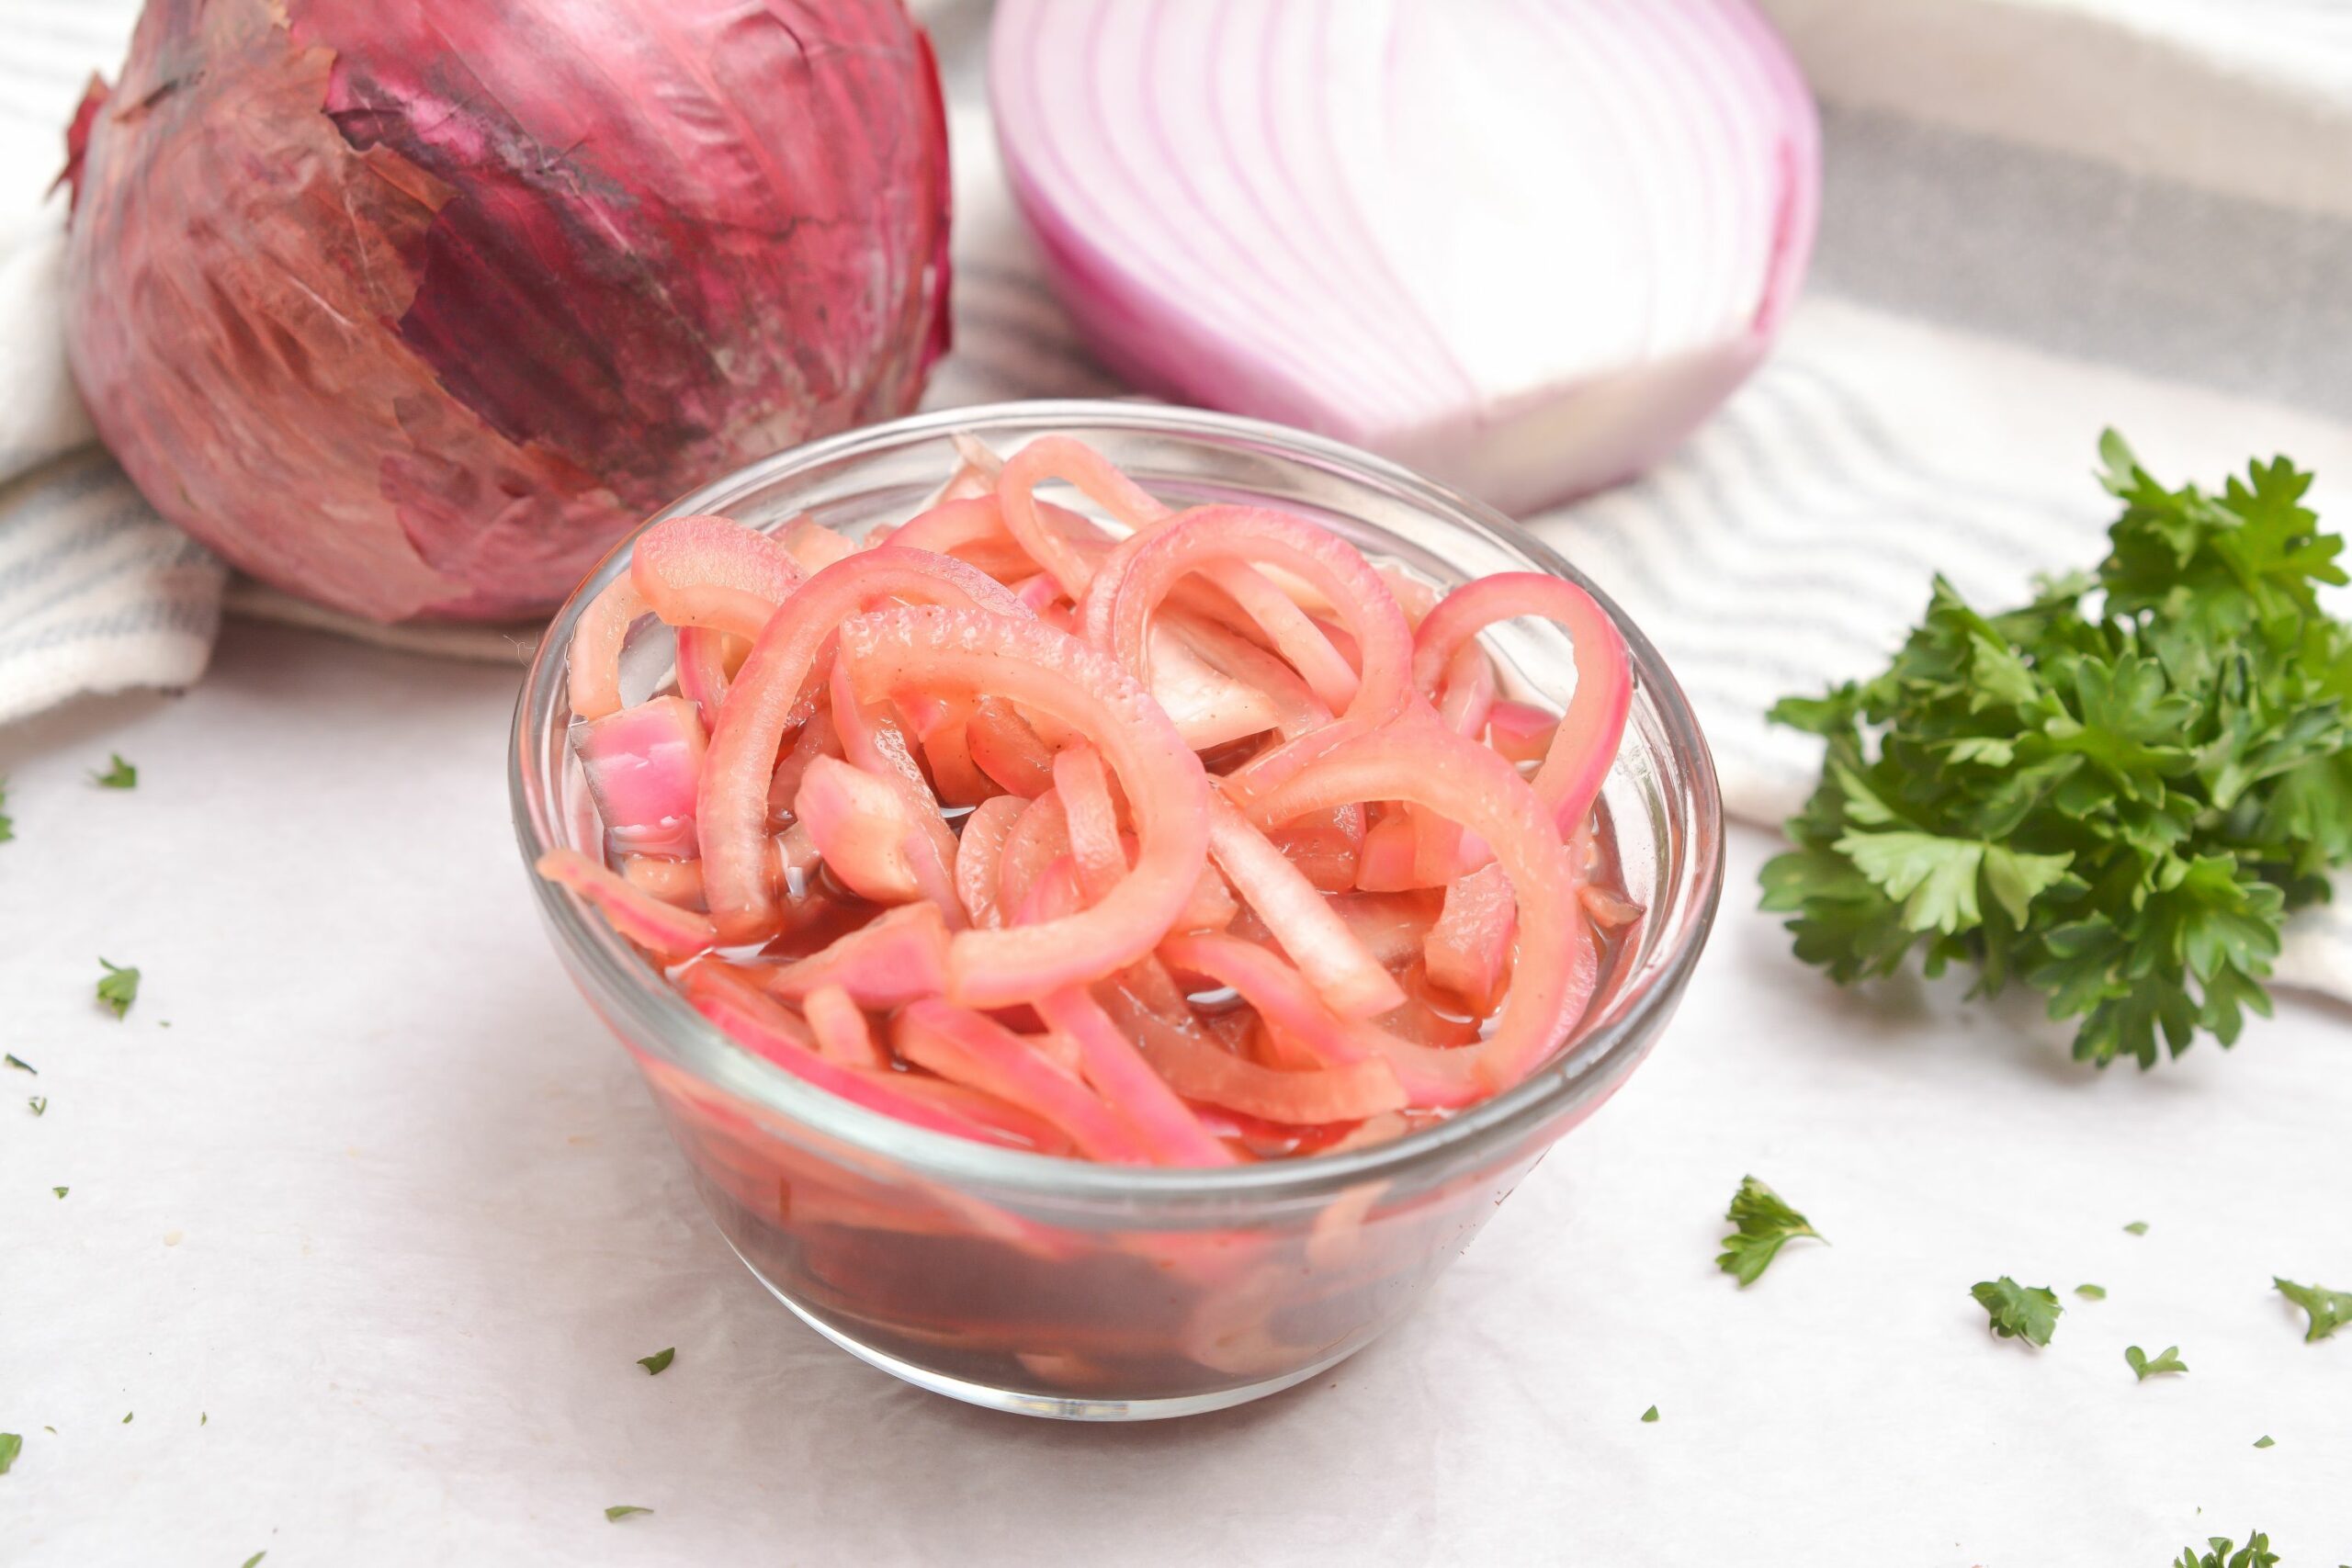 Picled onions with sides for a burger.